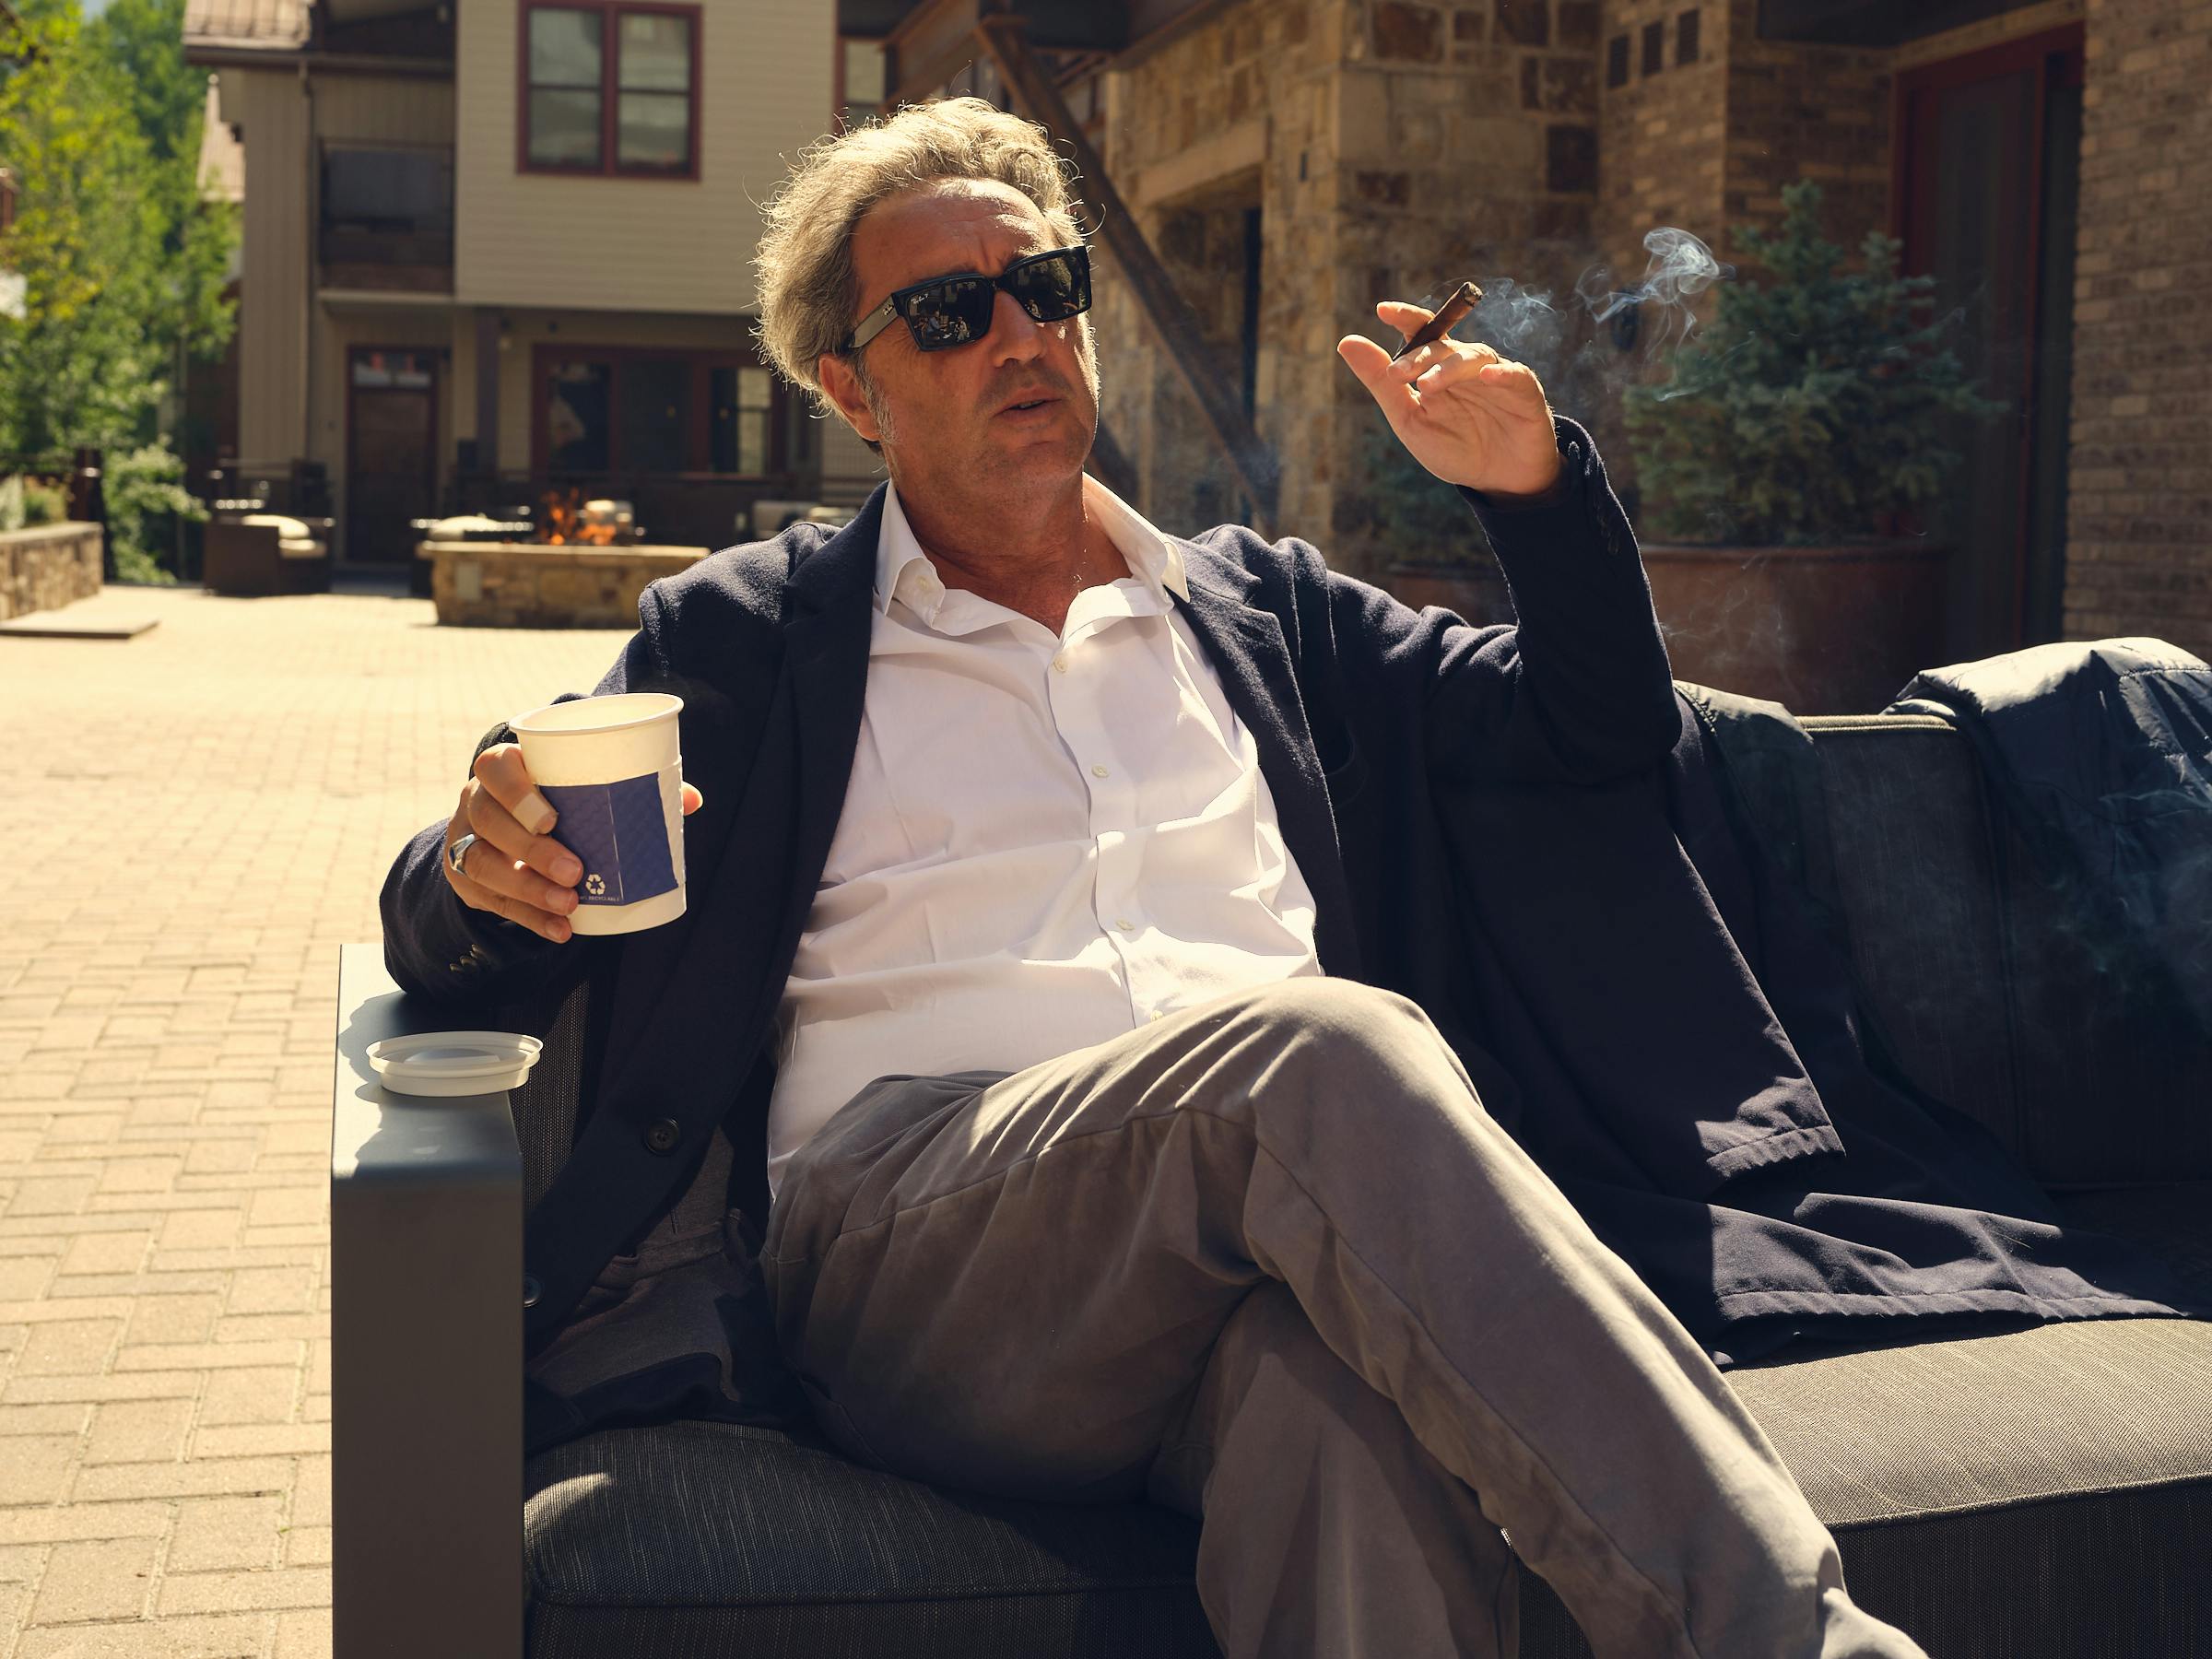 Paolo Sorrentino wears a white shirt, grey pants, and a navy cardigan.